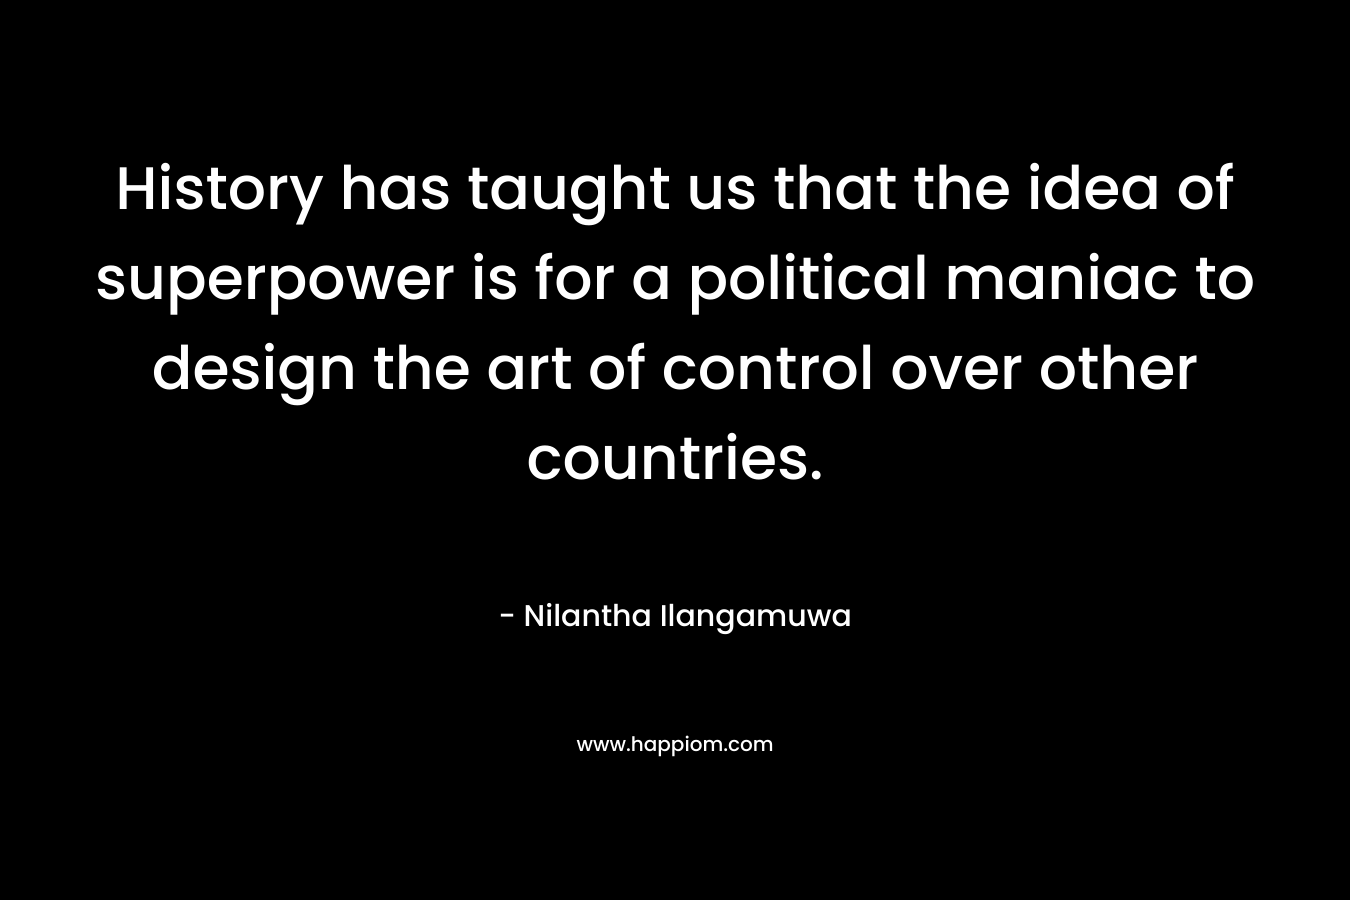 History has taught us that the idea of superpower is for a political maniac to design the art of control over other countries. – Nilantha Ilangamuwa